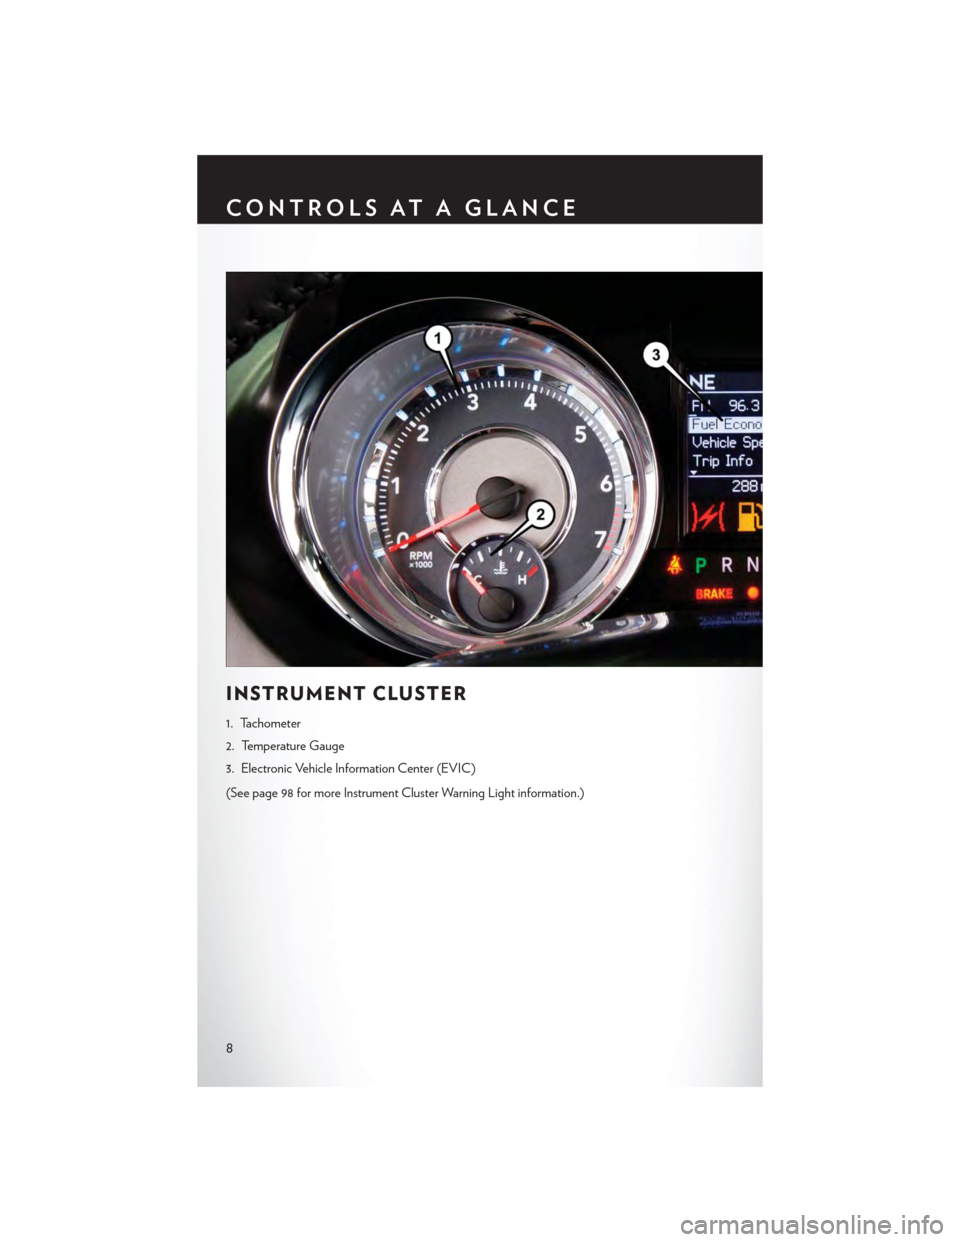 CHRYSLER TOWN AND COUNTRY 2015 5.G User Guide INSTRUMENT CLUSTER
1. Tachometer
2. Temperature Gauge
3. Electronic Vehicle Information Center (EVIC)
(See page 98 for more Instrument Cluster Warning Light information.)
CONTROLS AT A GLANCE
8 